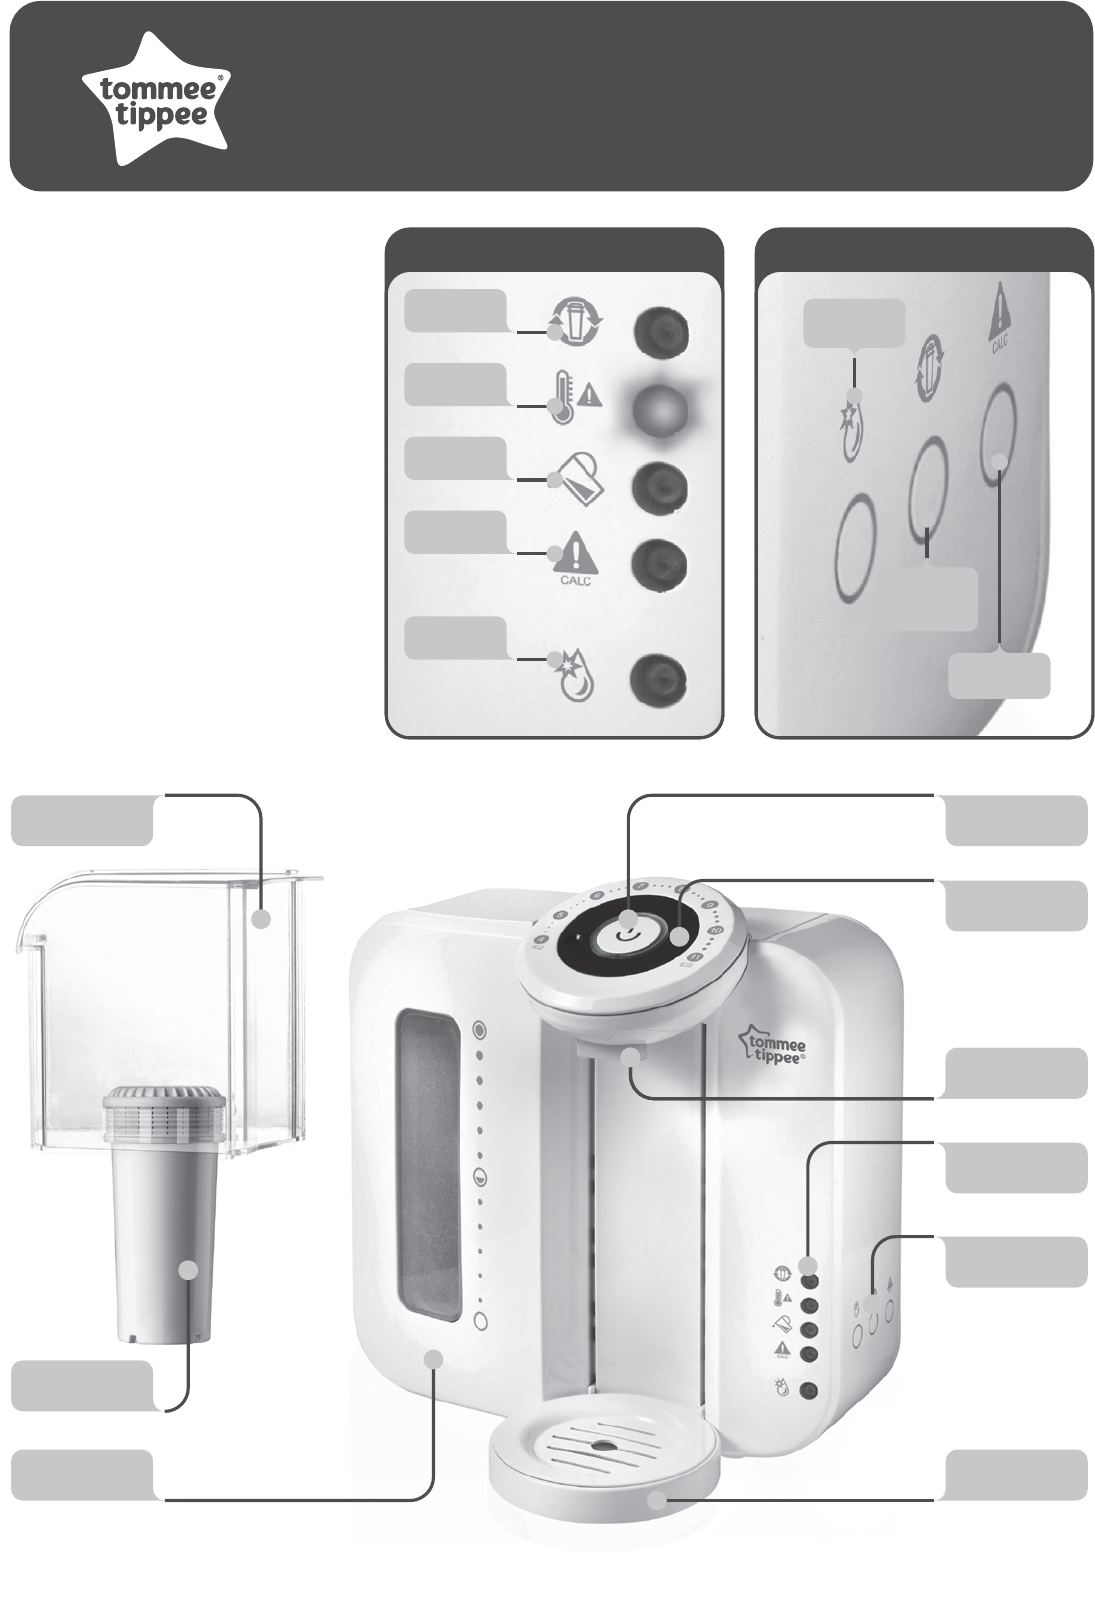 tommee tippee perfect prep machine Parts 